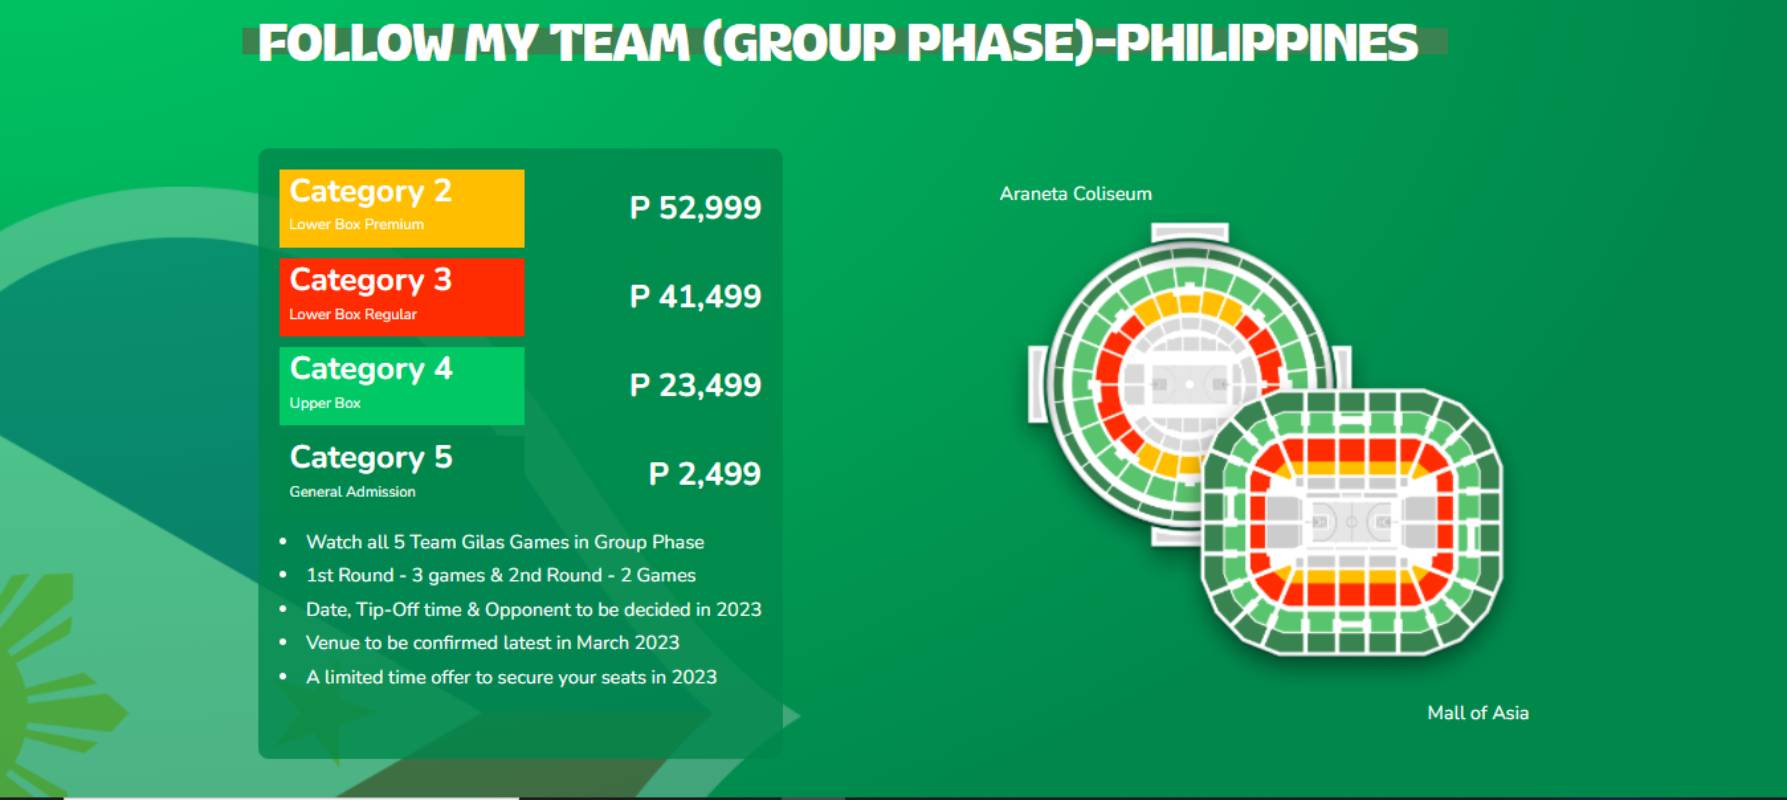 2023-FIBA-World-Cup-Tickets-Philippines Tickets for Gilas World Cup games to be available starting March 1 2023 FIBA World Cup Basketball Gilas Pilipinas News  - philippine sports news